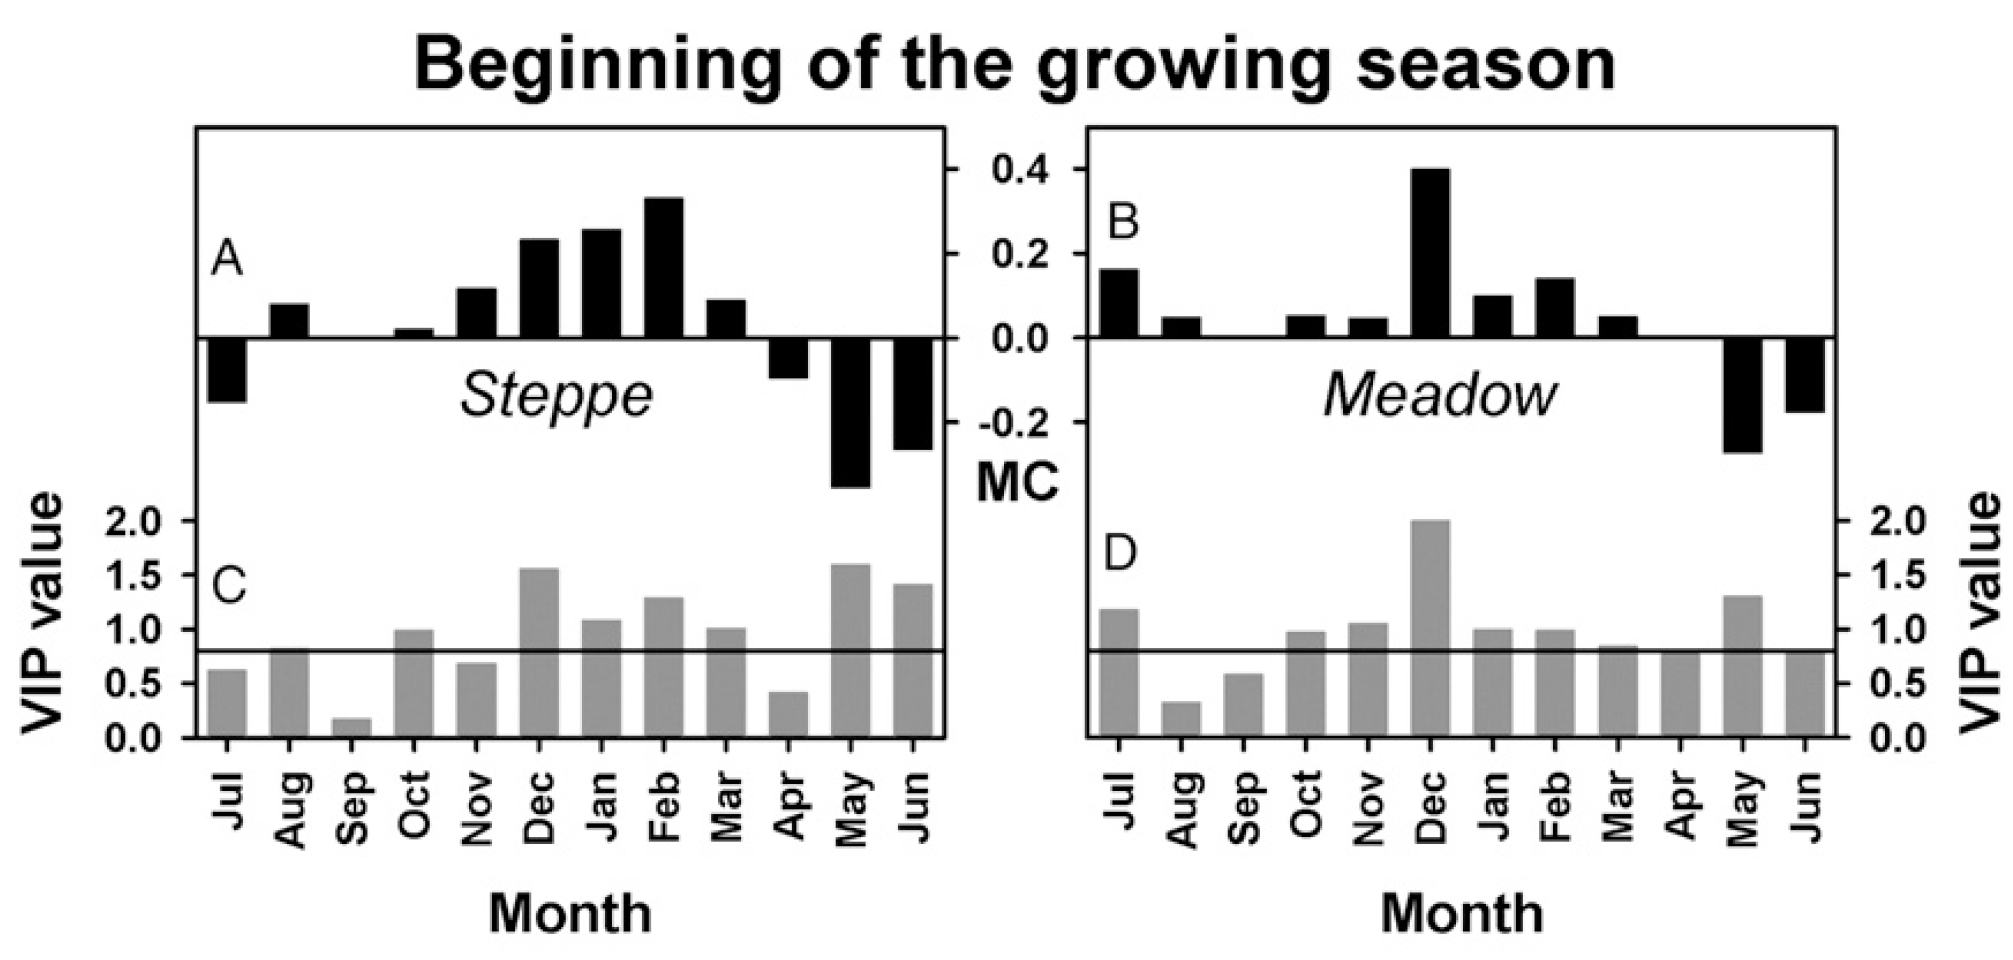 Response of the BGS (A–D) in steppe and meadow vegetation of the Tibetan Plateau between 1982 and 2006 to monthly temperatures, according to PLS regression. The variable importance plots (VIP; C and D) indicate that temperatures in both spring (May and June) and winter (October through March) were important for explaining the response of BGS dates (VIP values above 0.8). Model coefficients (MC) of the centered and scaled data showed that warm winter temperatures delayed spring phenology (positive coefficients), whereas warm spring temperatures advanced the BGS (negative coefficients) for both steppe (A) and meadow (B). Including both effects into phenological models could substantially enhance our understanding of climate-change effects on vegetation at temperate and cold locations (Yu et al., 2010)